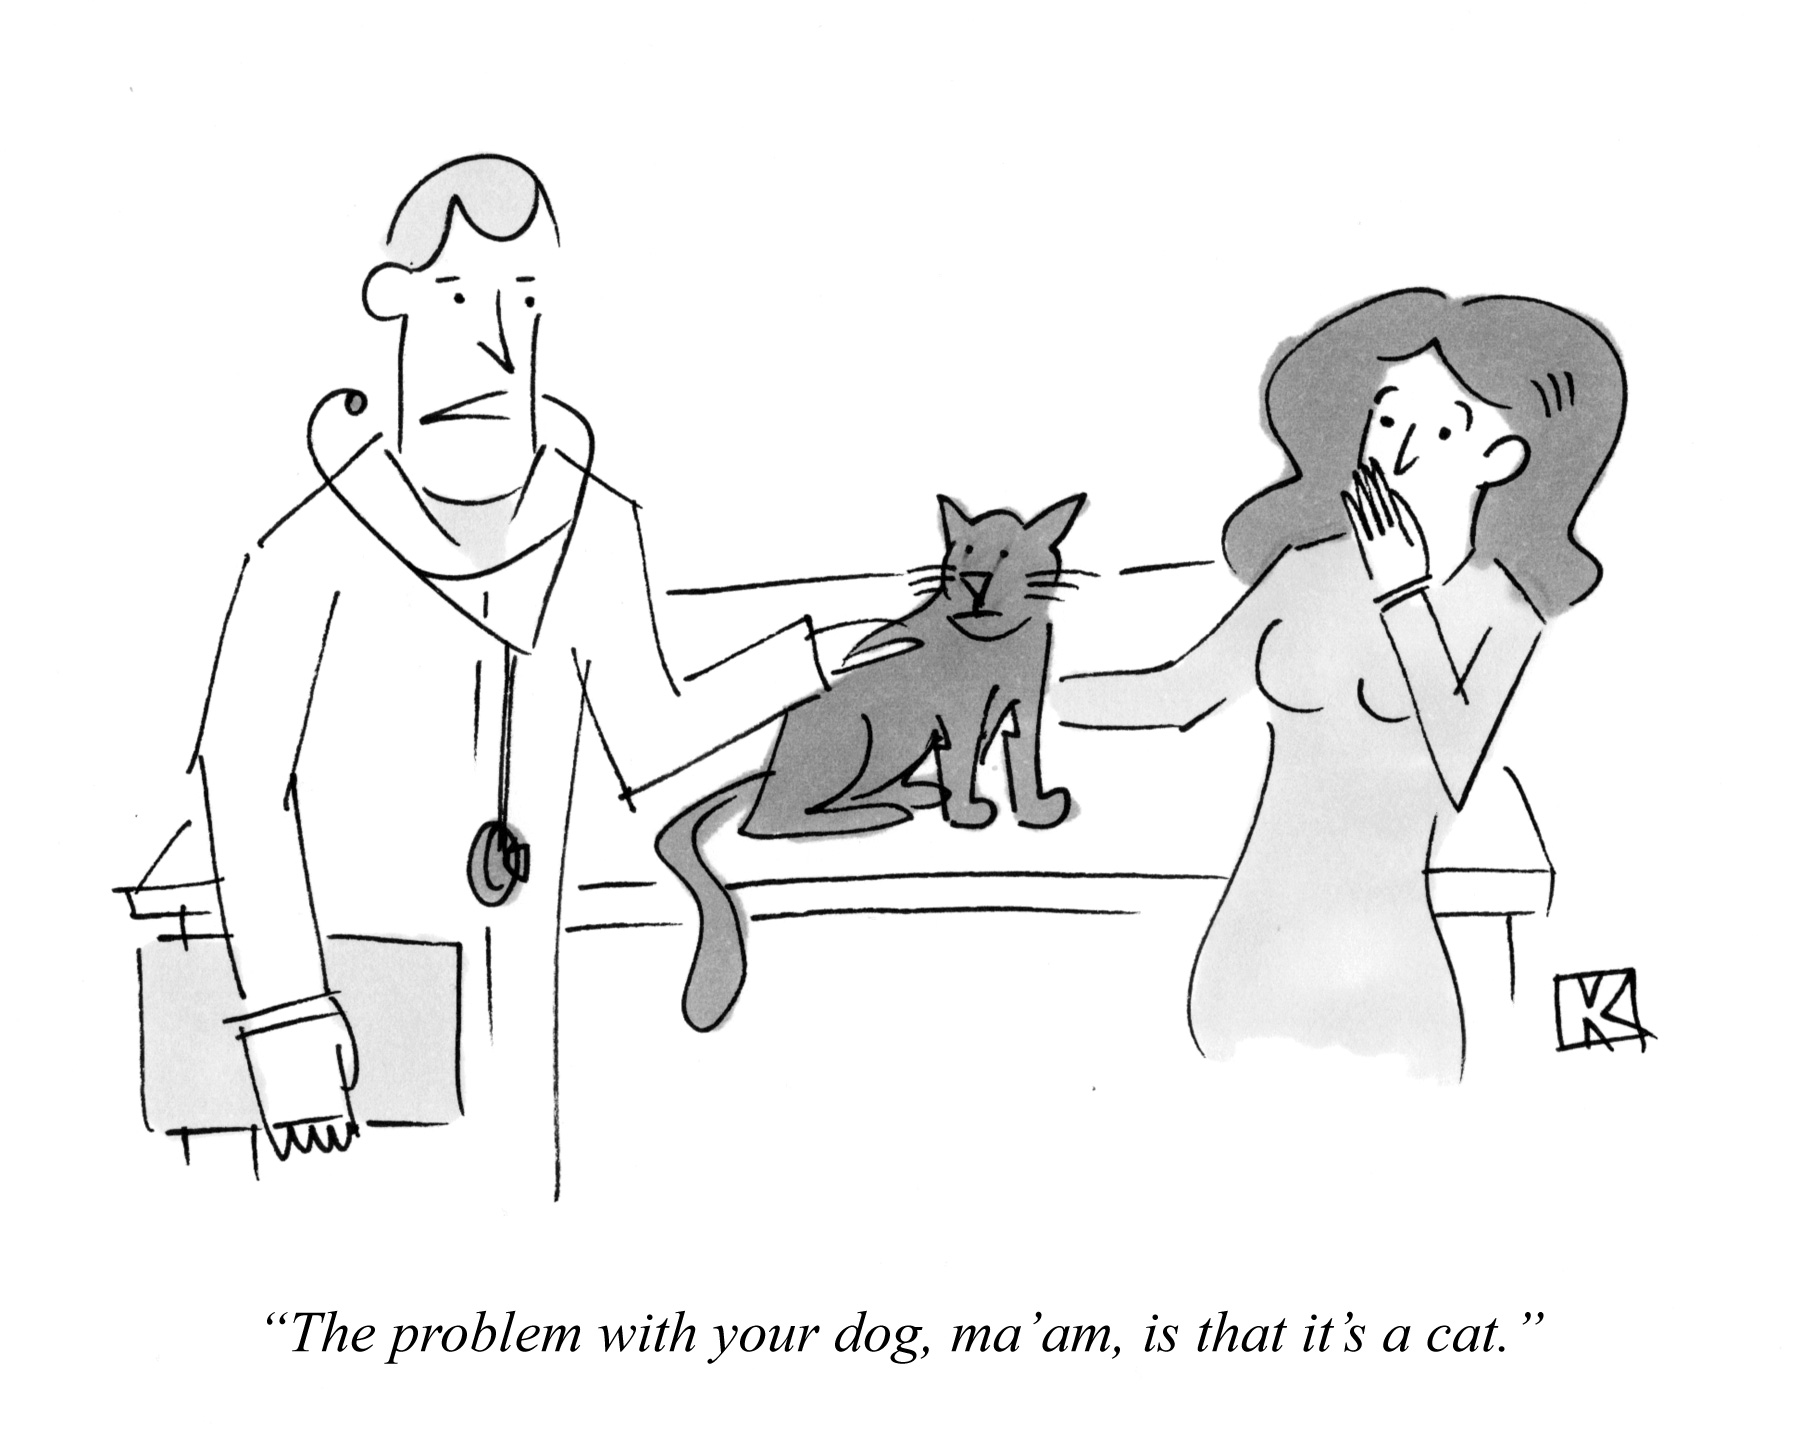 The problem with your dog, ma'am, is that it's a cat.